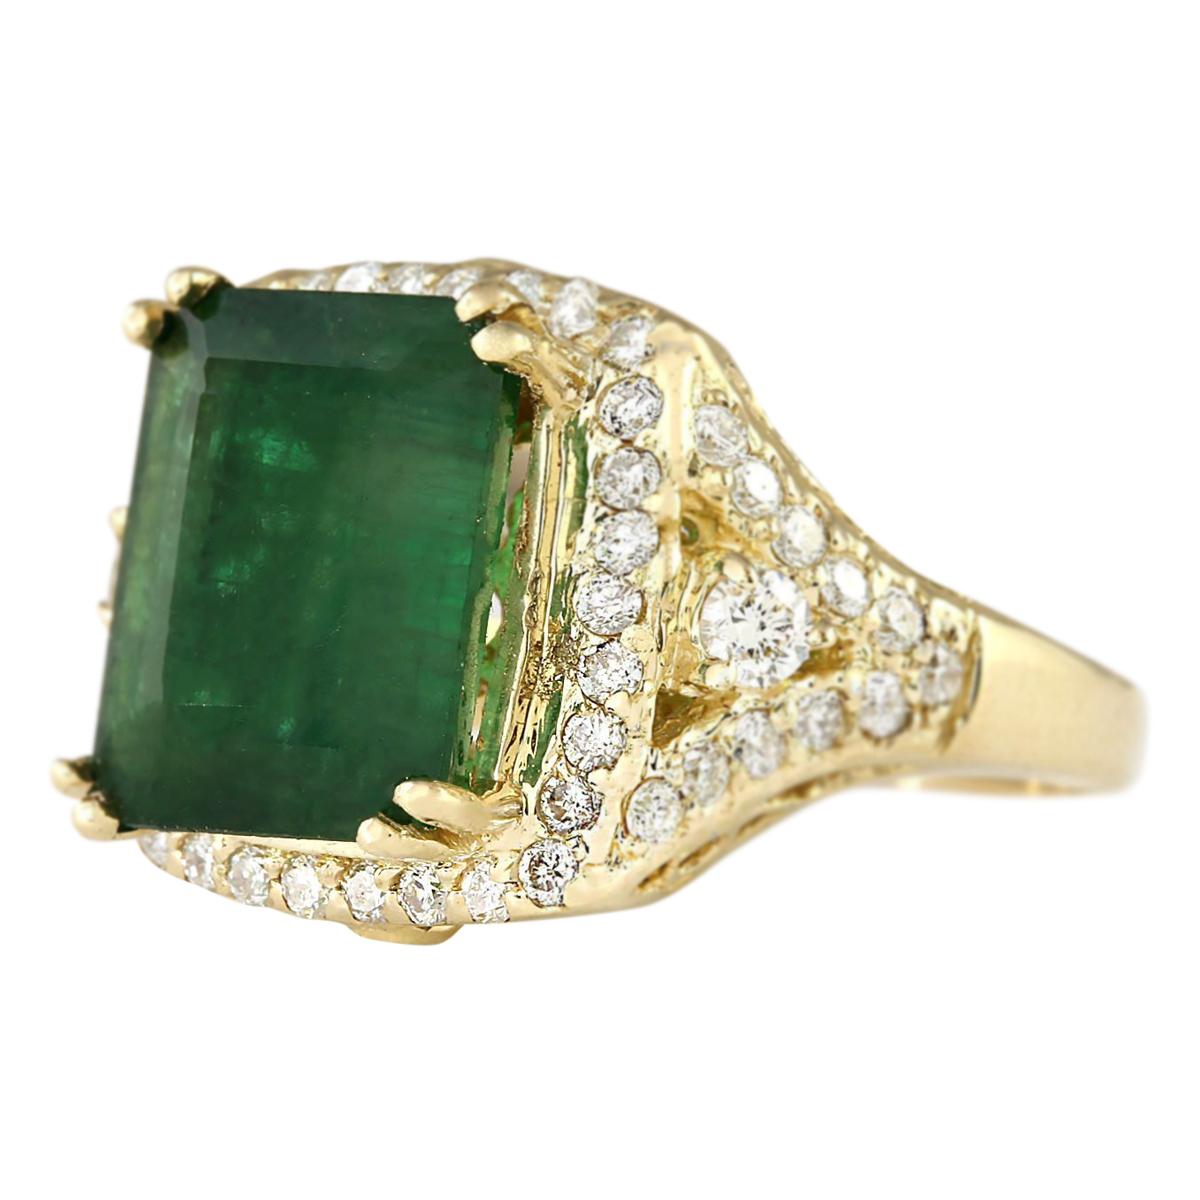 6.50 Carat Emerald 14 Karat Yellow Gold Diamond Ring
Stamped: 14K Yellow Gold
Total Ring Weight: 9.0 Grams
Total  Emerald Weight is 5.50 Carat (Measures: 12.00x10.00 mm)
Color: Green
Total  Diamond Weight is 1.00 Carat
Color: F-G, Clarity: